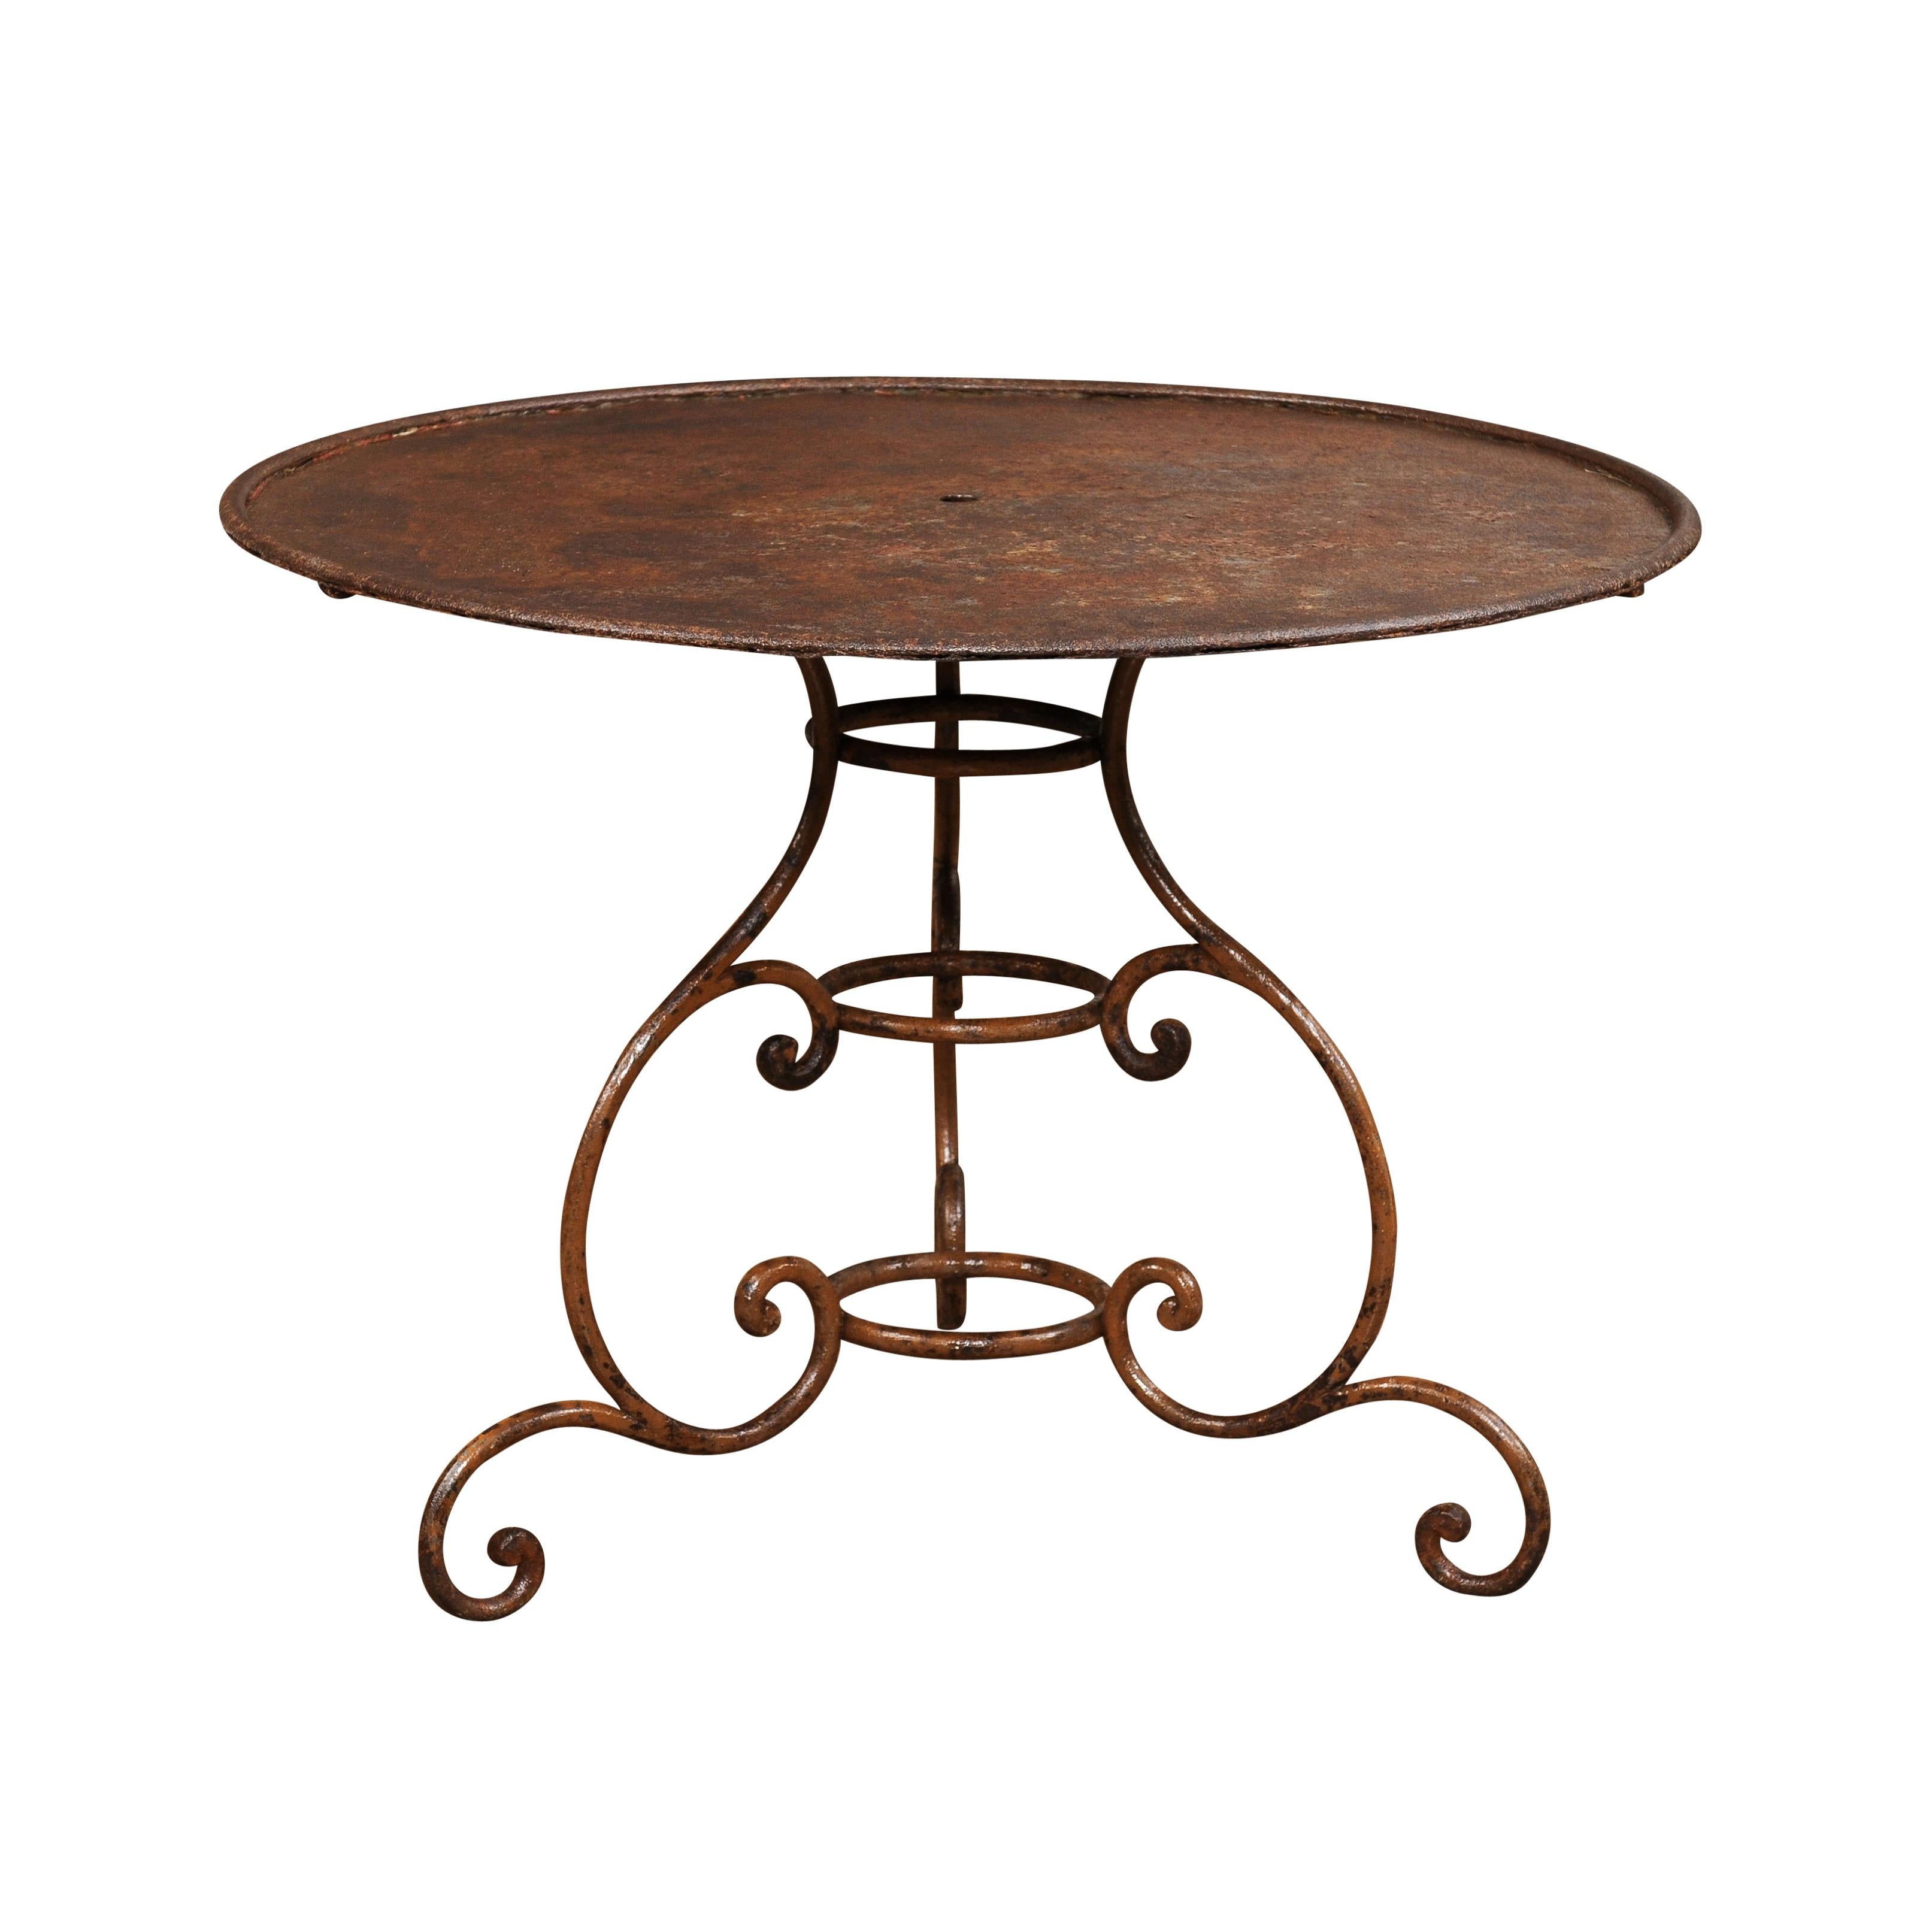 A French iron garden table from the 19th century with circular top, tripod scrolling base and great rustic character. Enhance your outdoor space with this charming French iron garden table from the 19th century. With its circular top, tripod